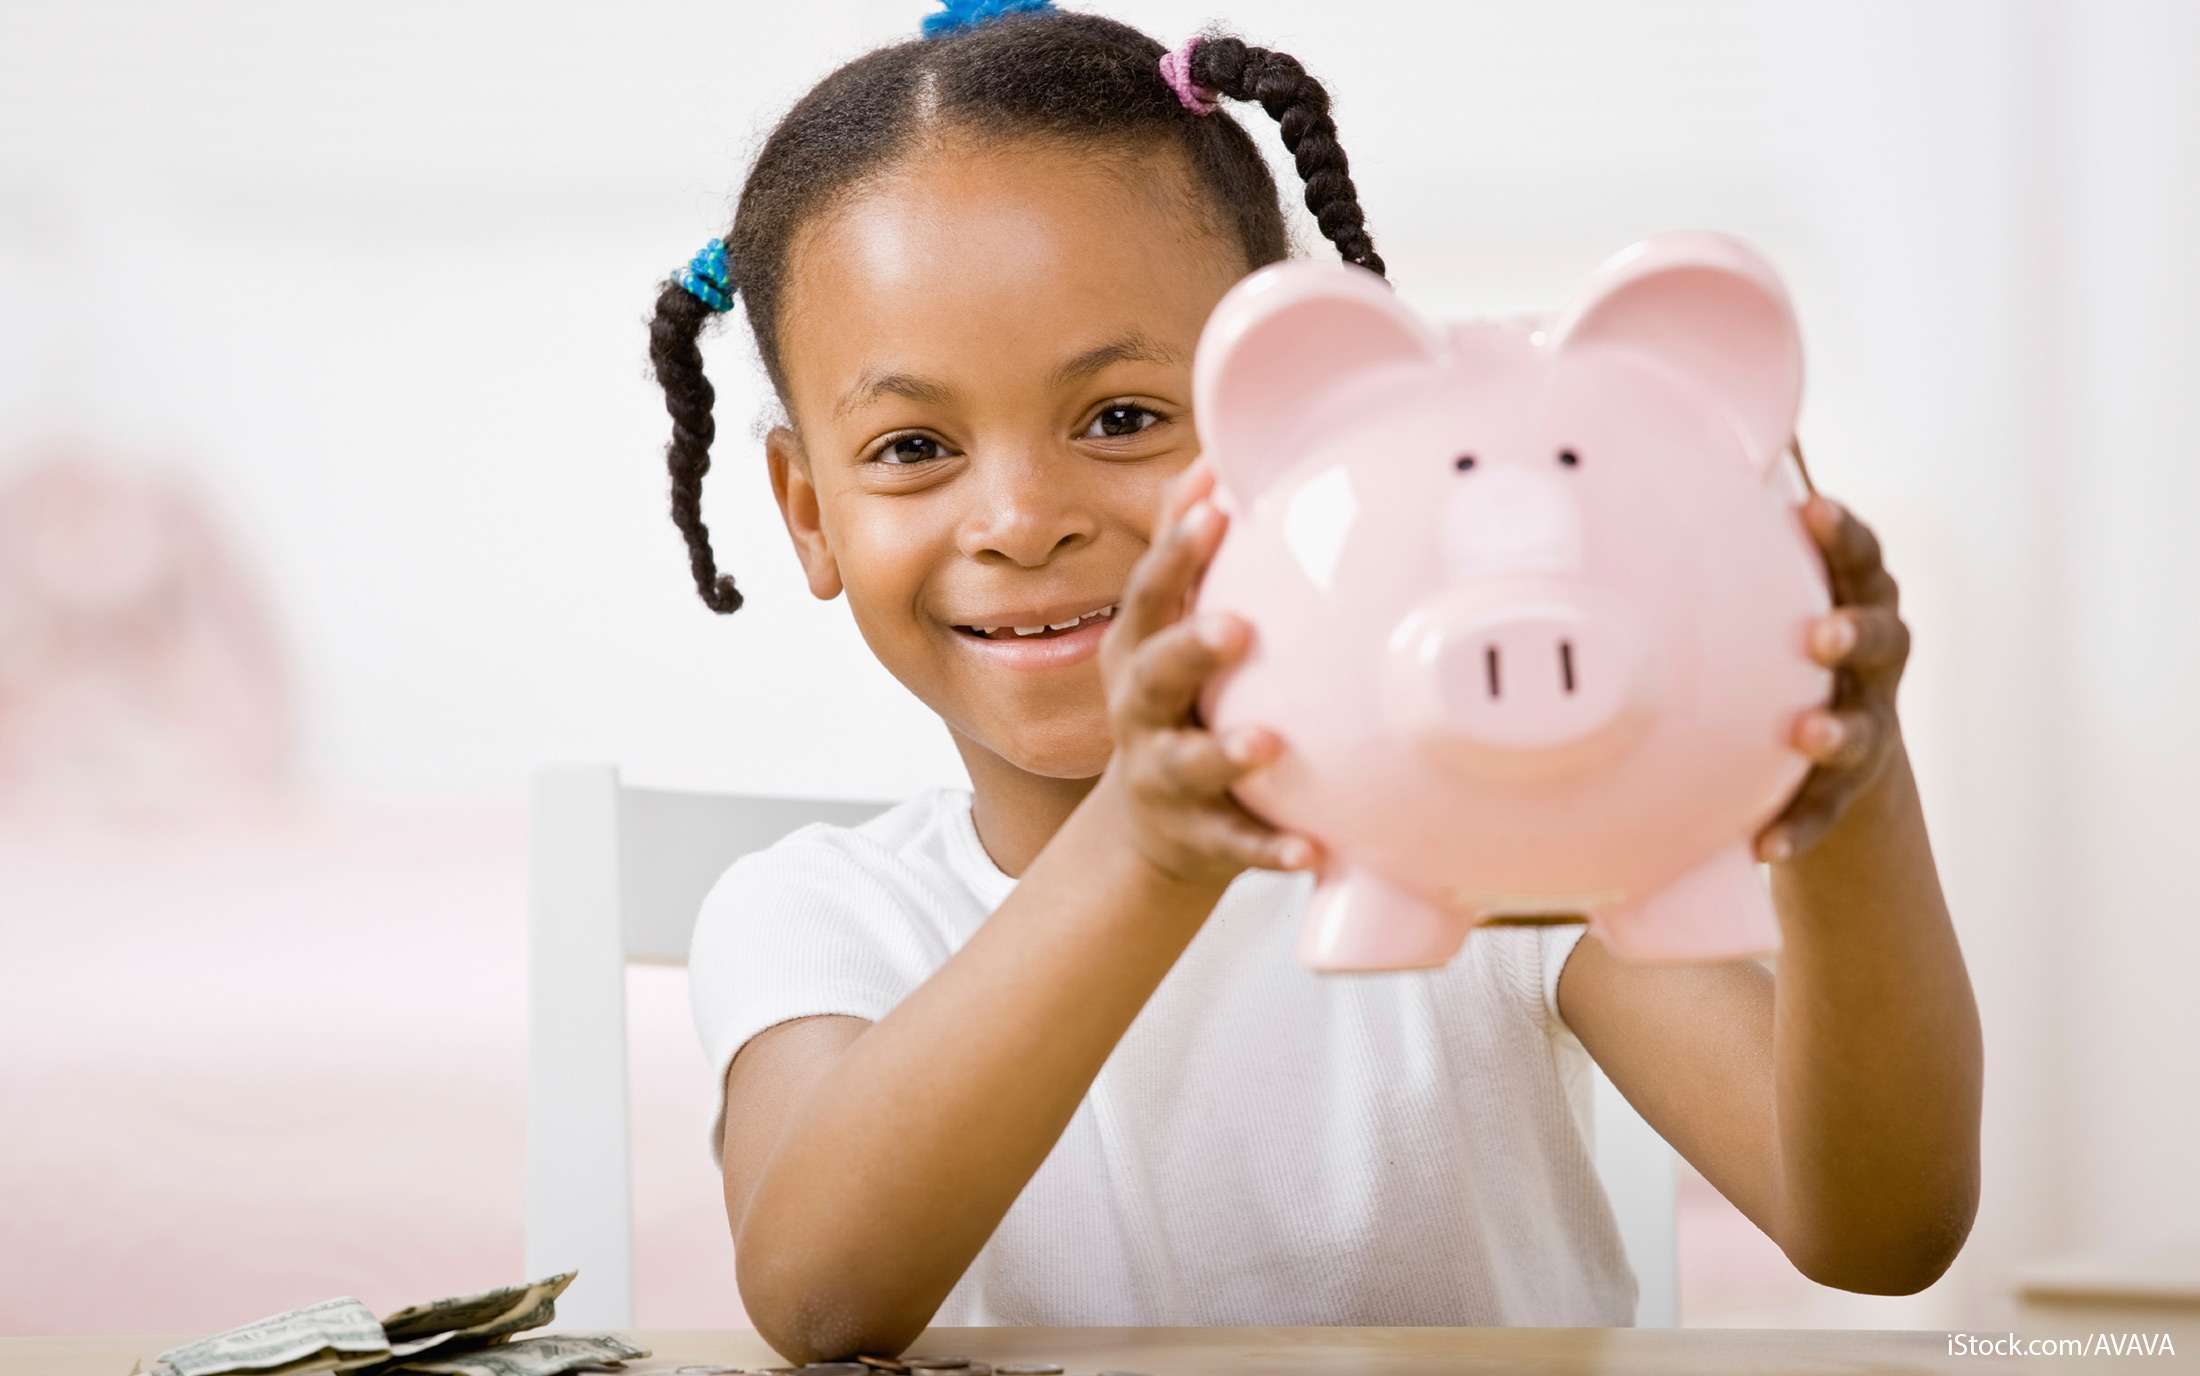 7 Things to Teach Your Kids About Credit and Money